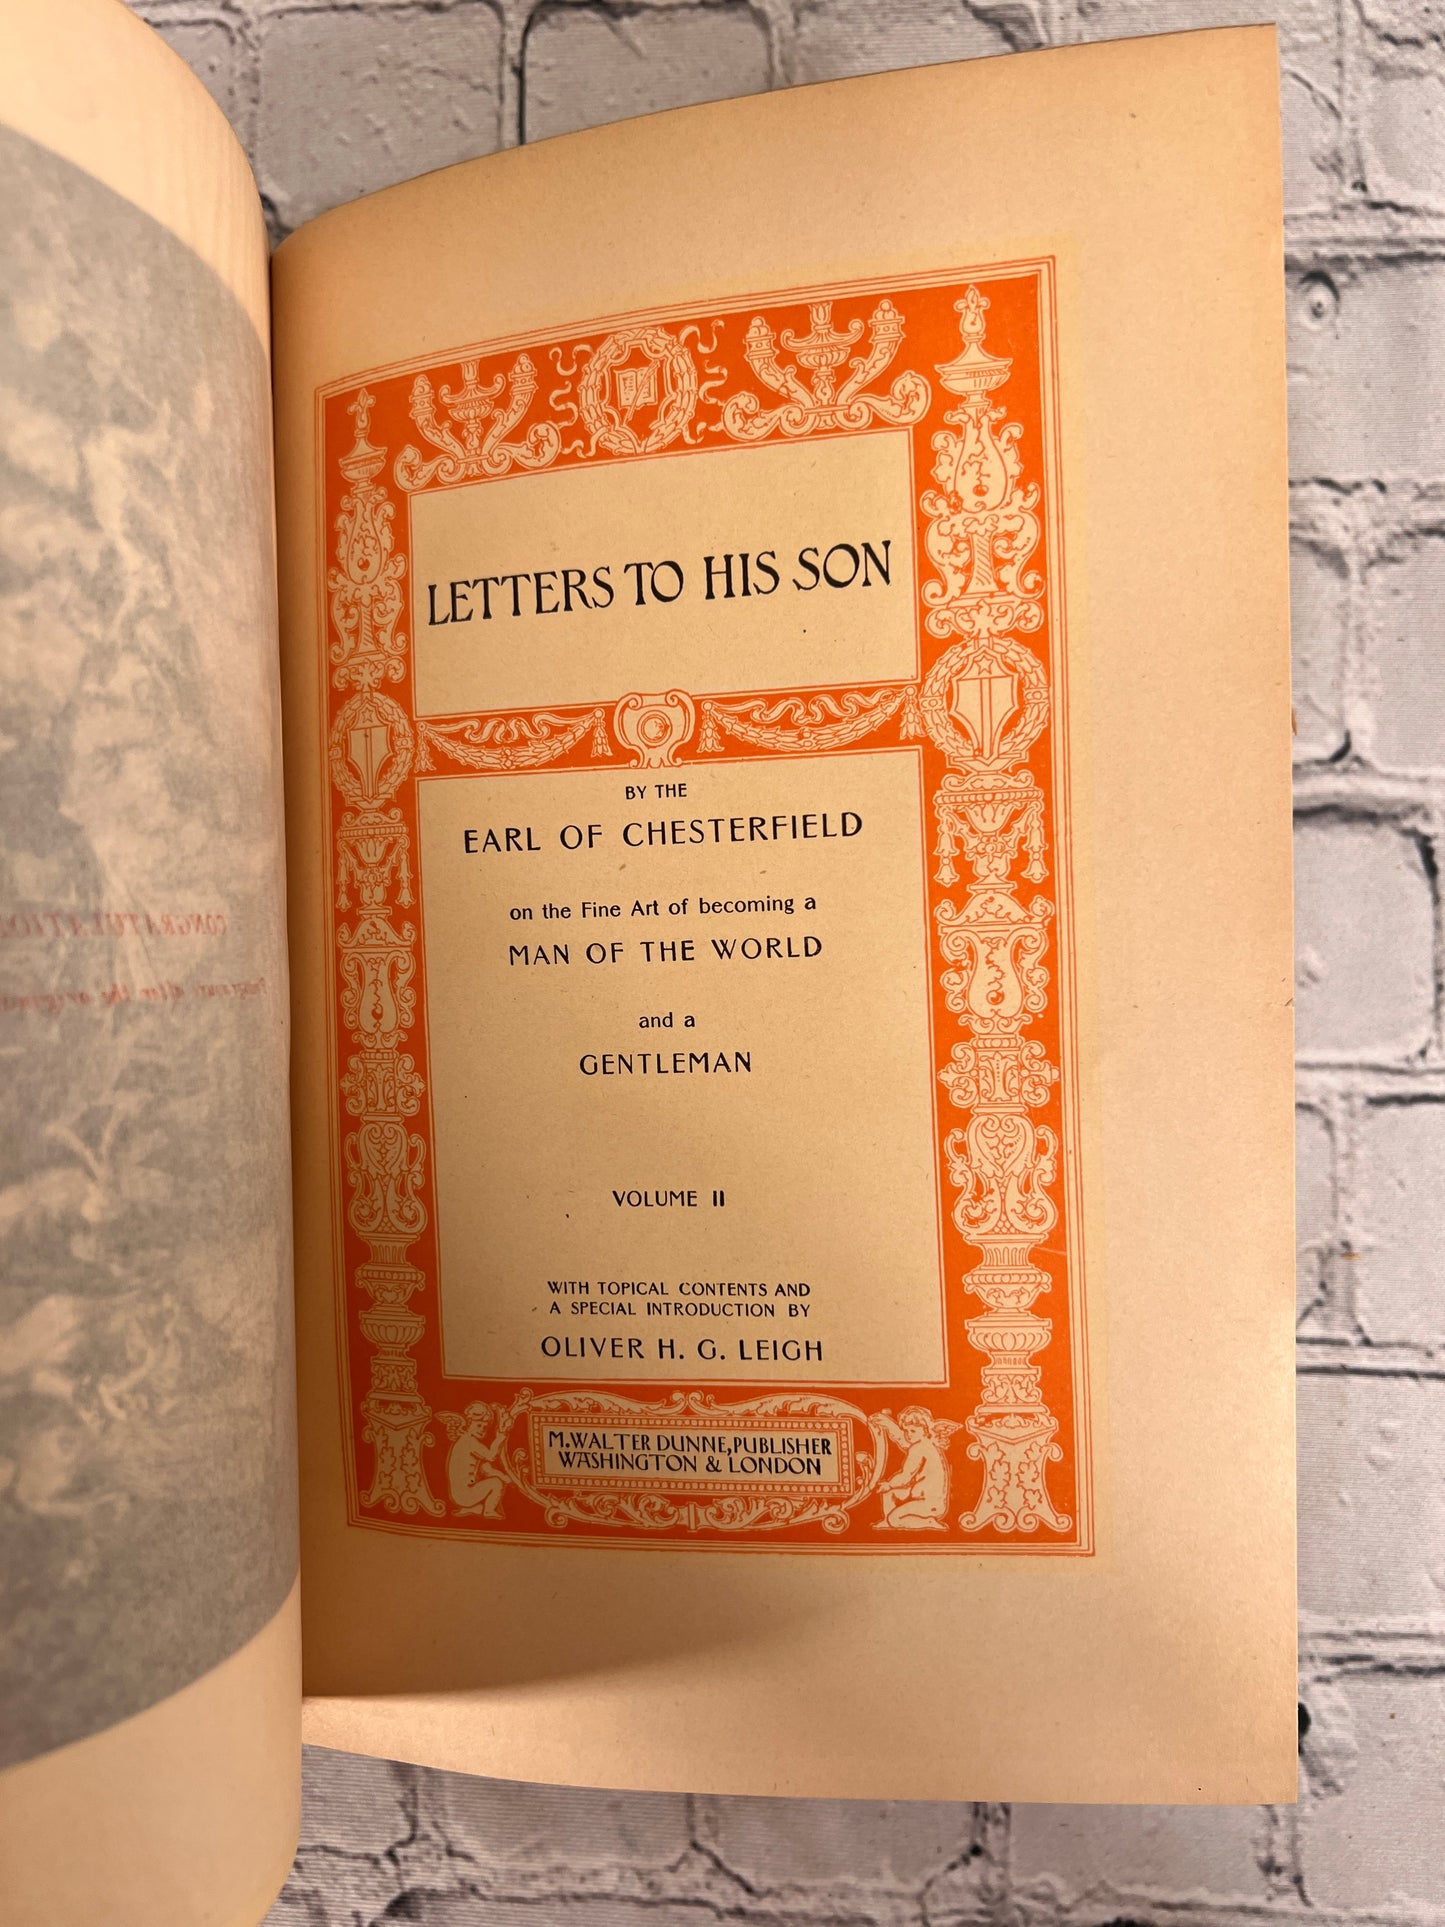 Universal Classcis Library - Letters to His Son by Earl of Chesterfield [1901]